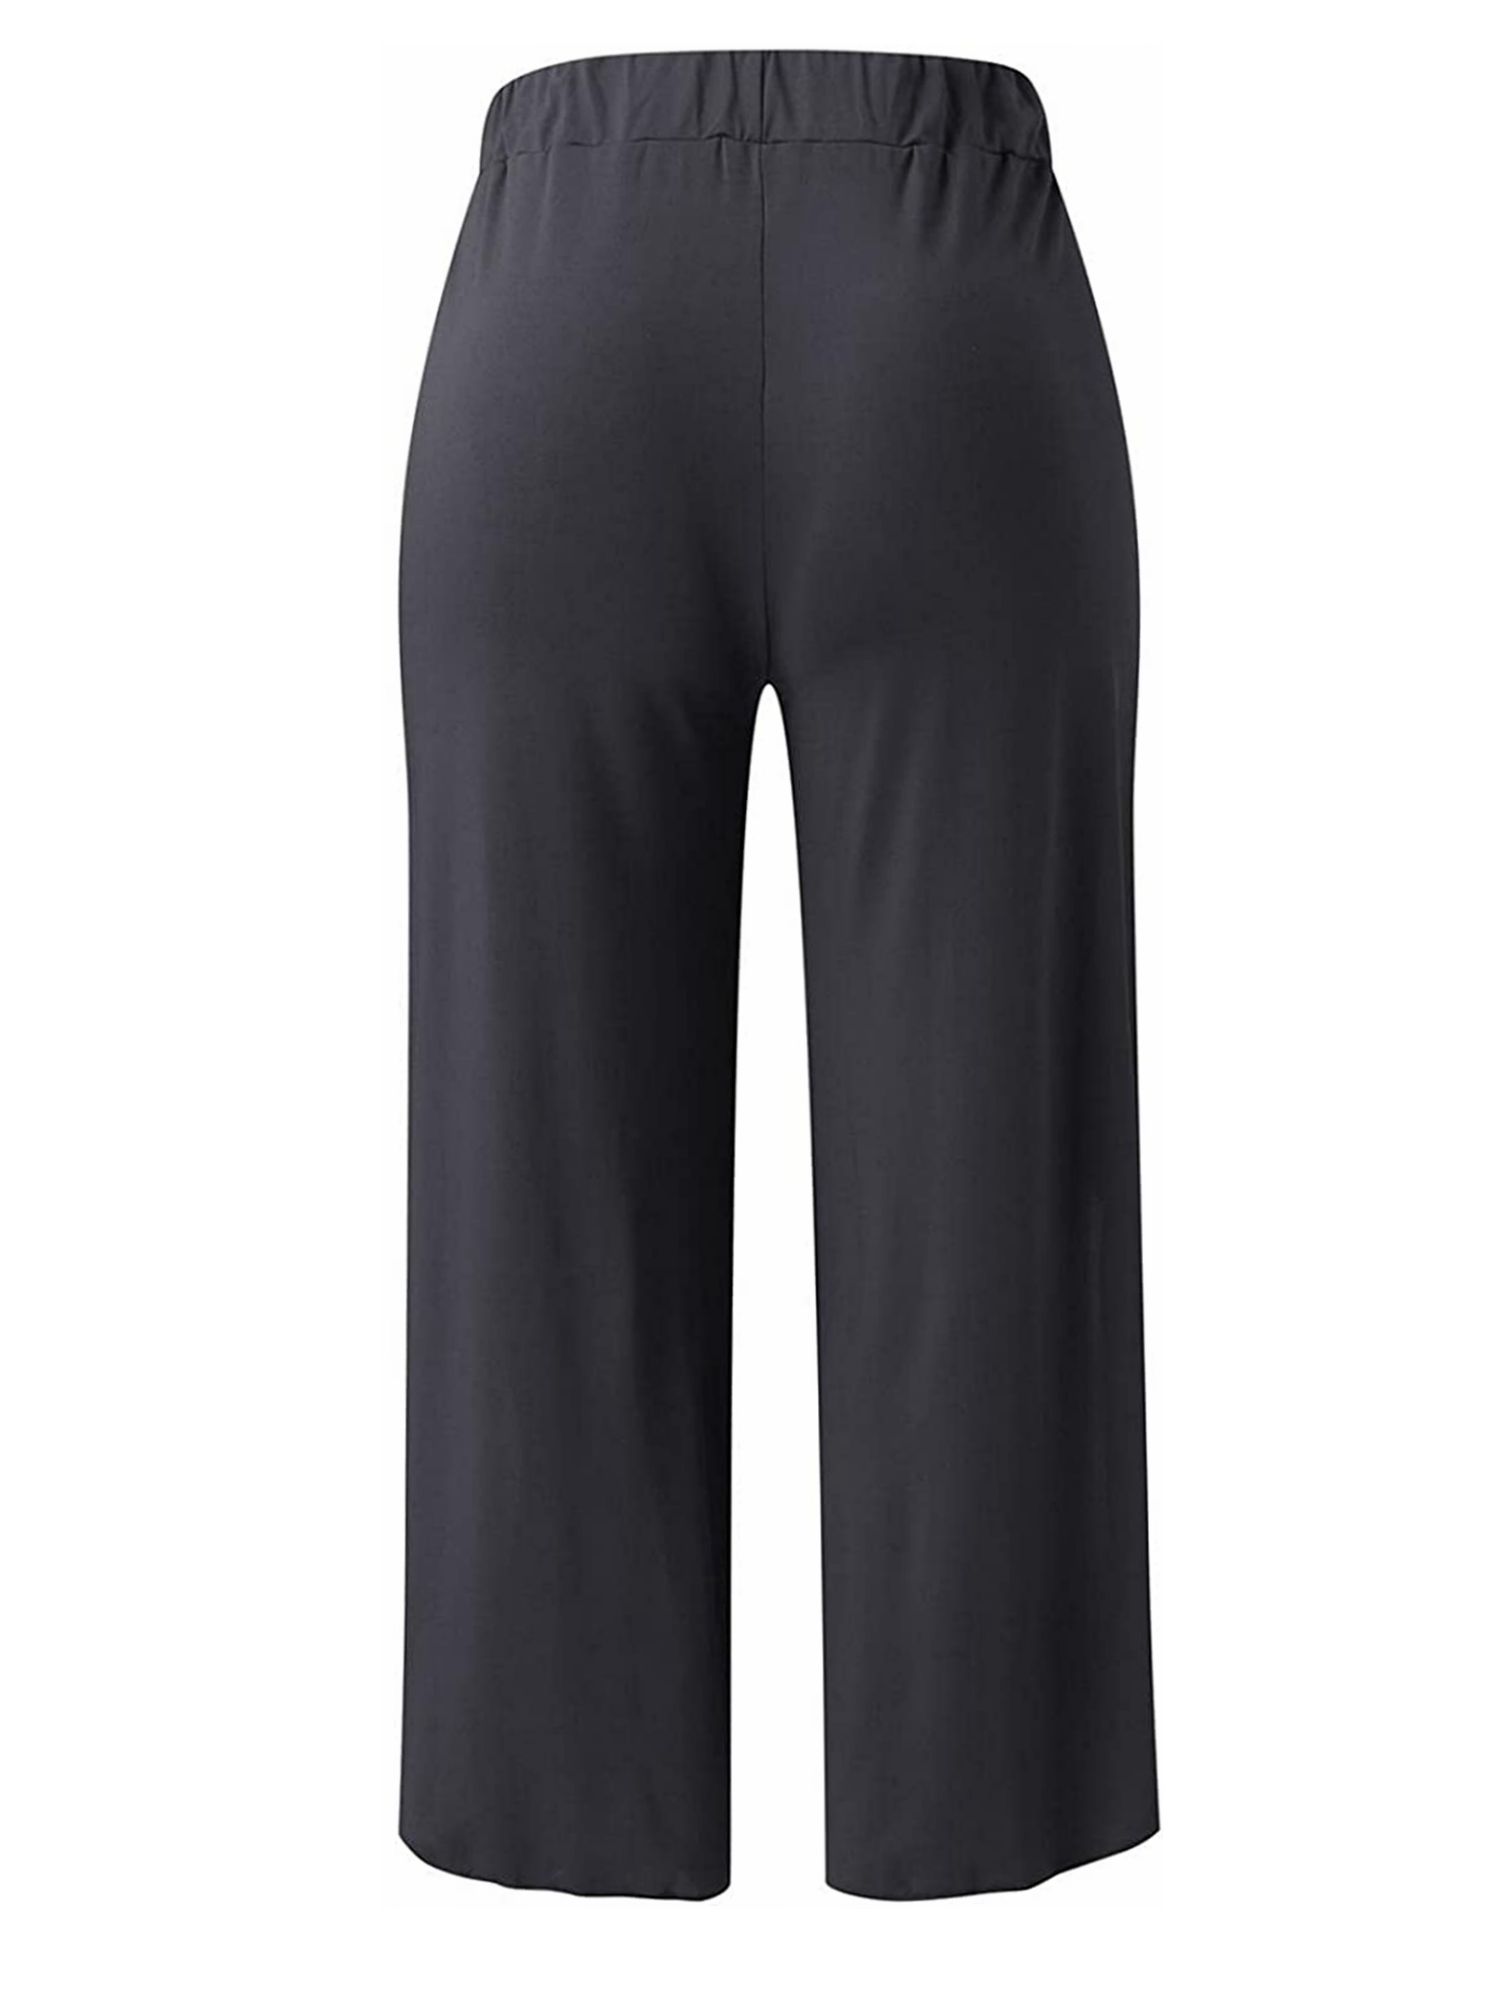 WOMEM Flowy Pants For Women, Pants Women's loose casual All kinds of colors  match elegant sports retro pants Harajuku College cute (Color : Black, Size  : L) price in Saudi Arabia